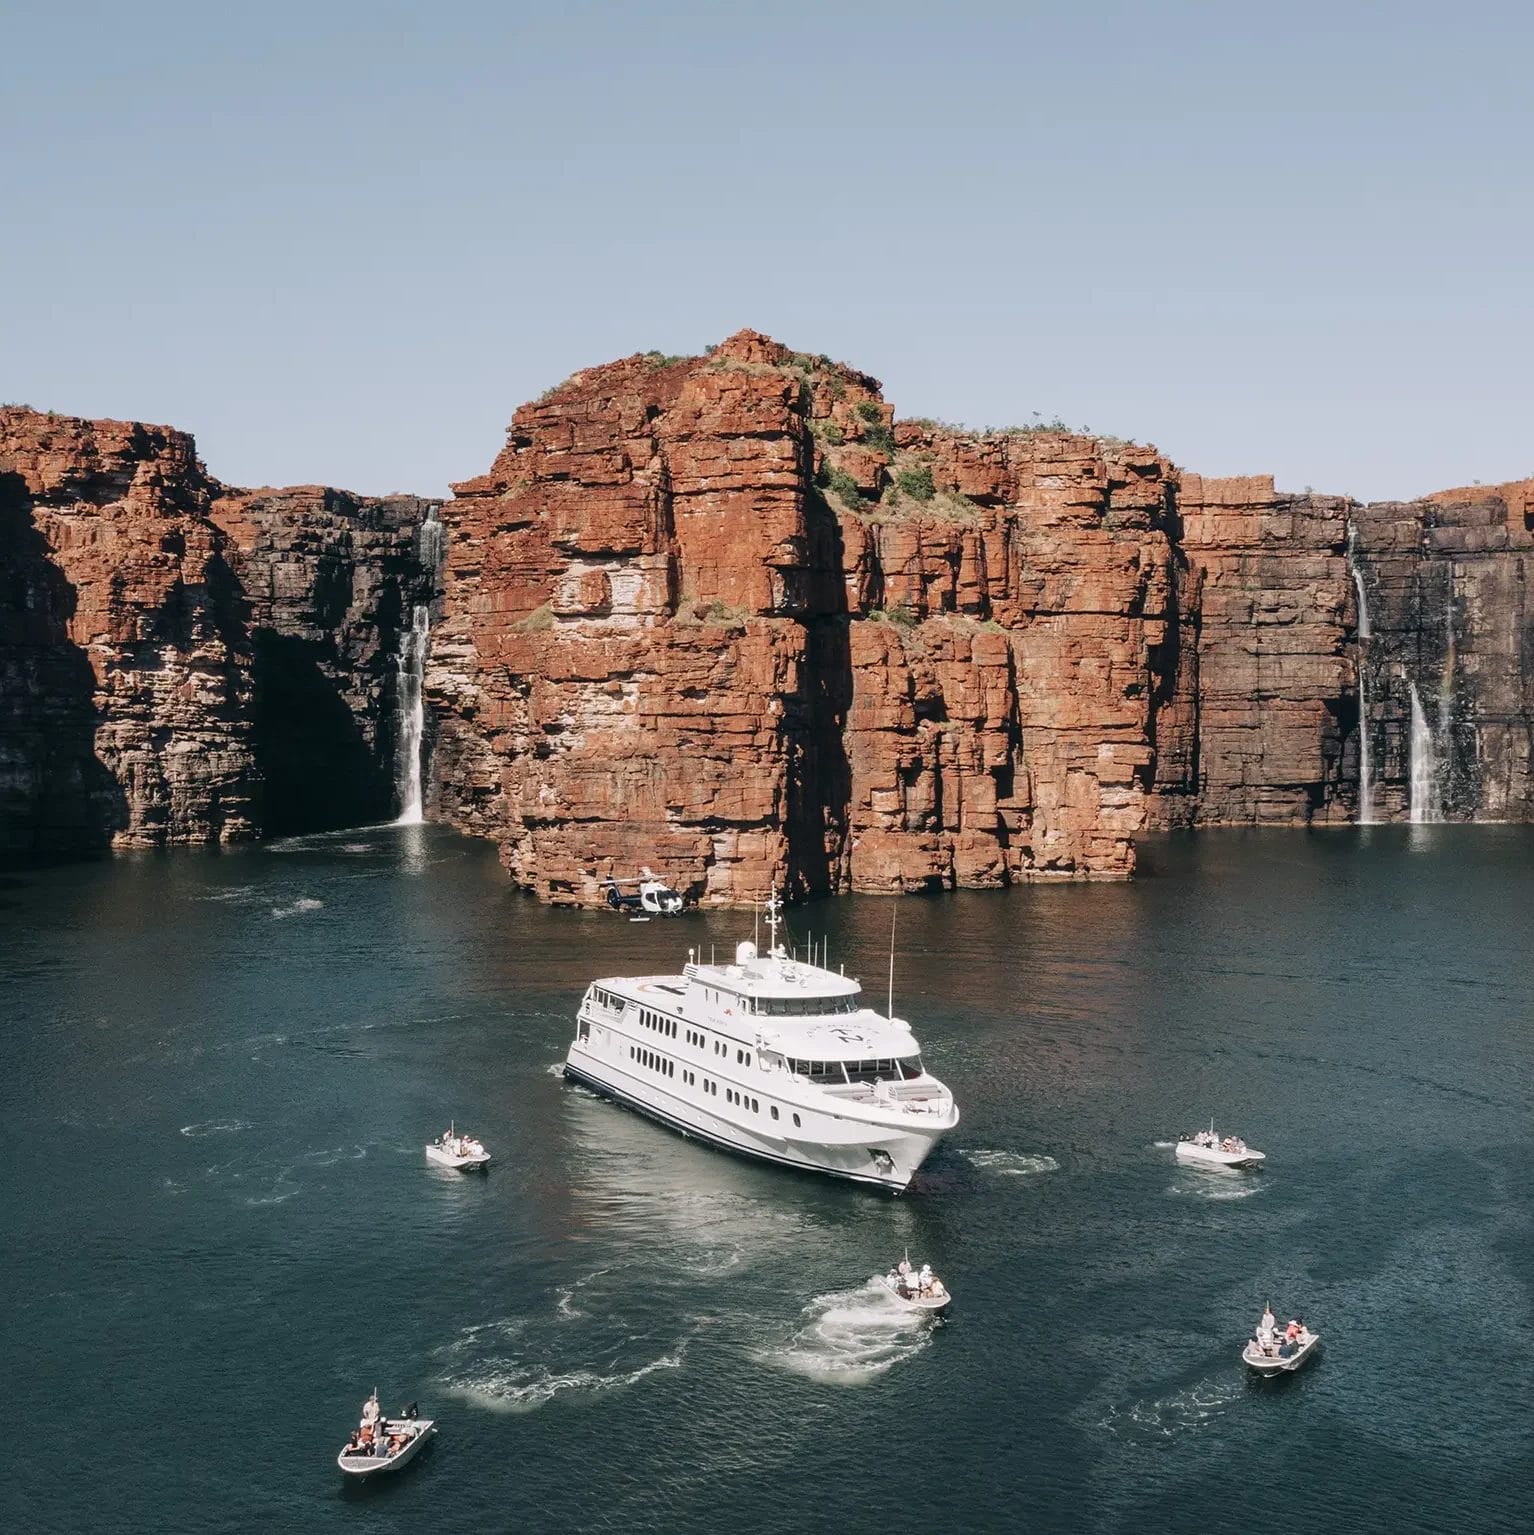 Landscape of the True North vessel and full fleet of tenders and helicopter at King George Falls, Kimberley, Western Australia